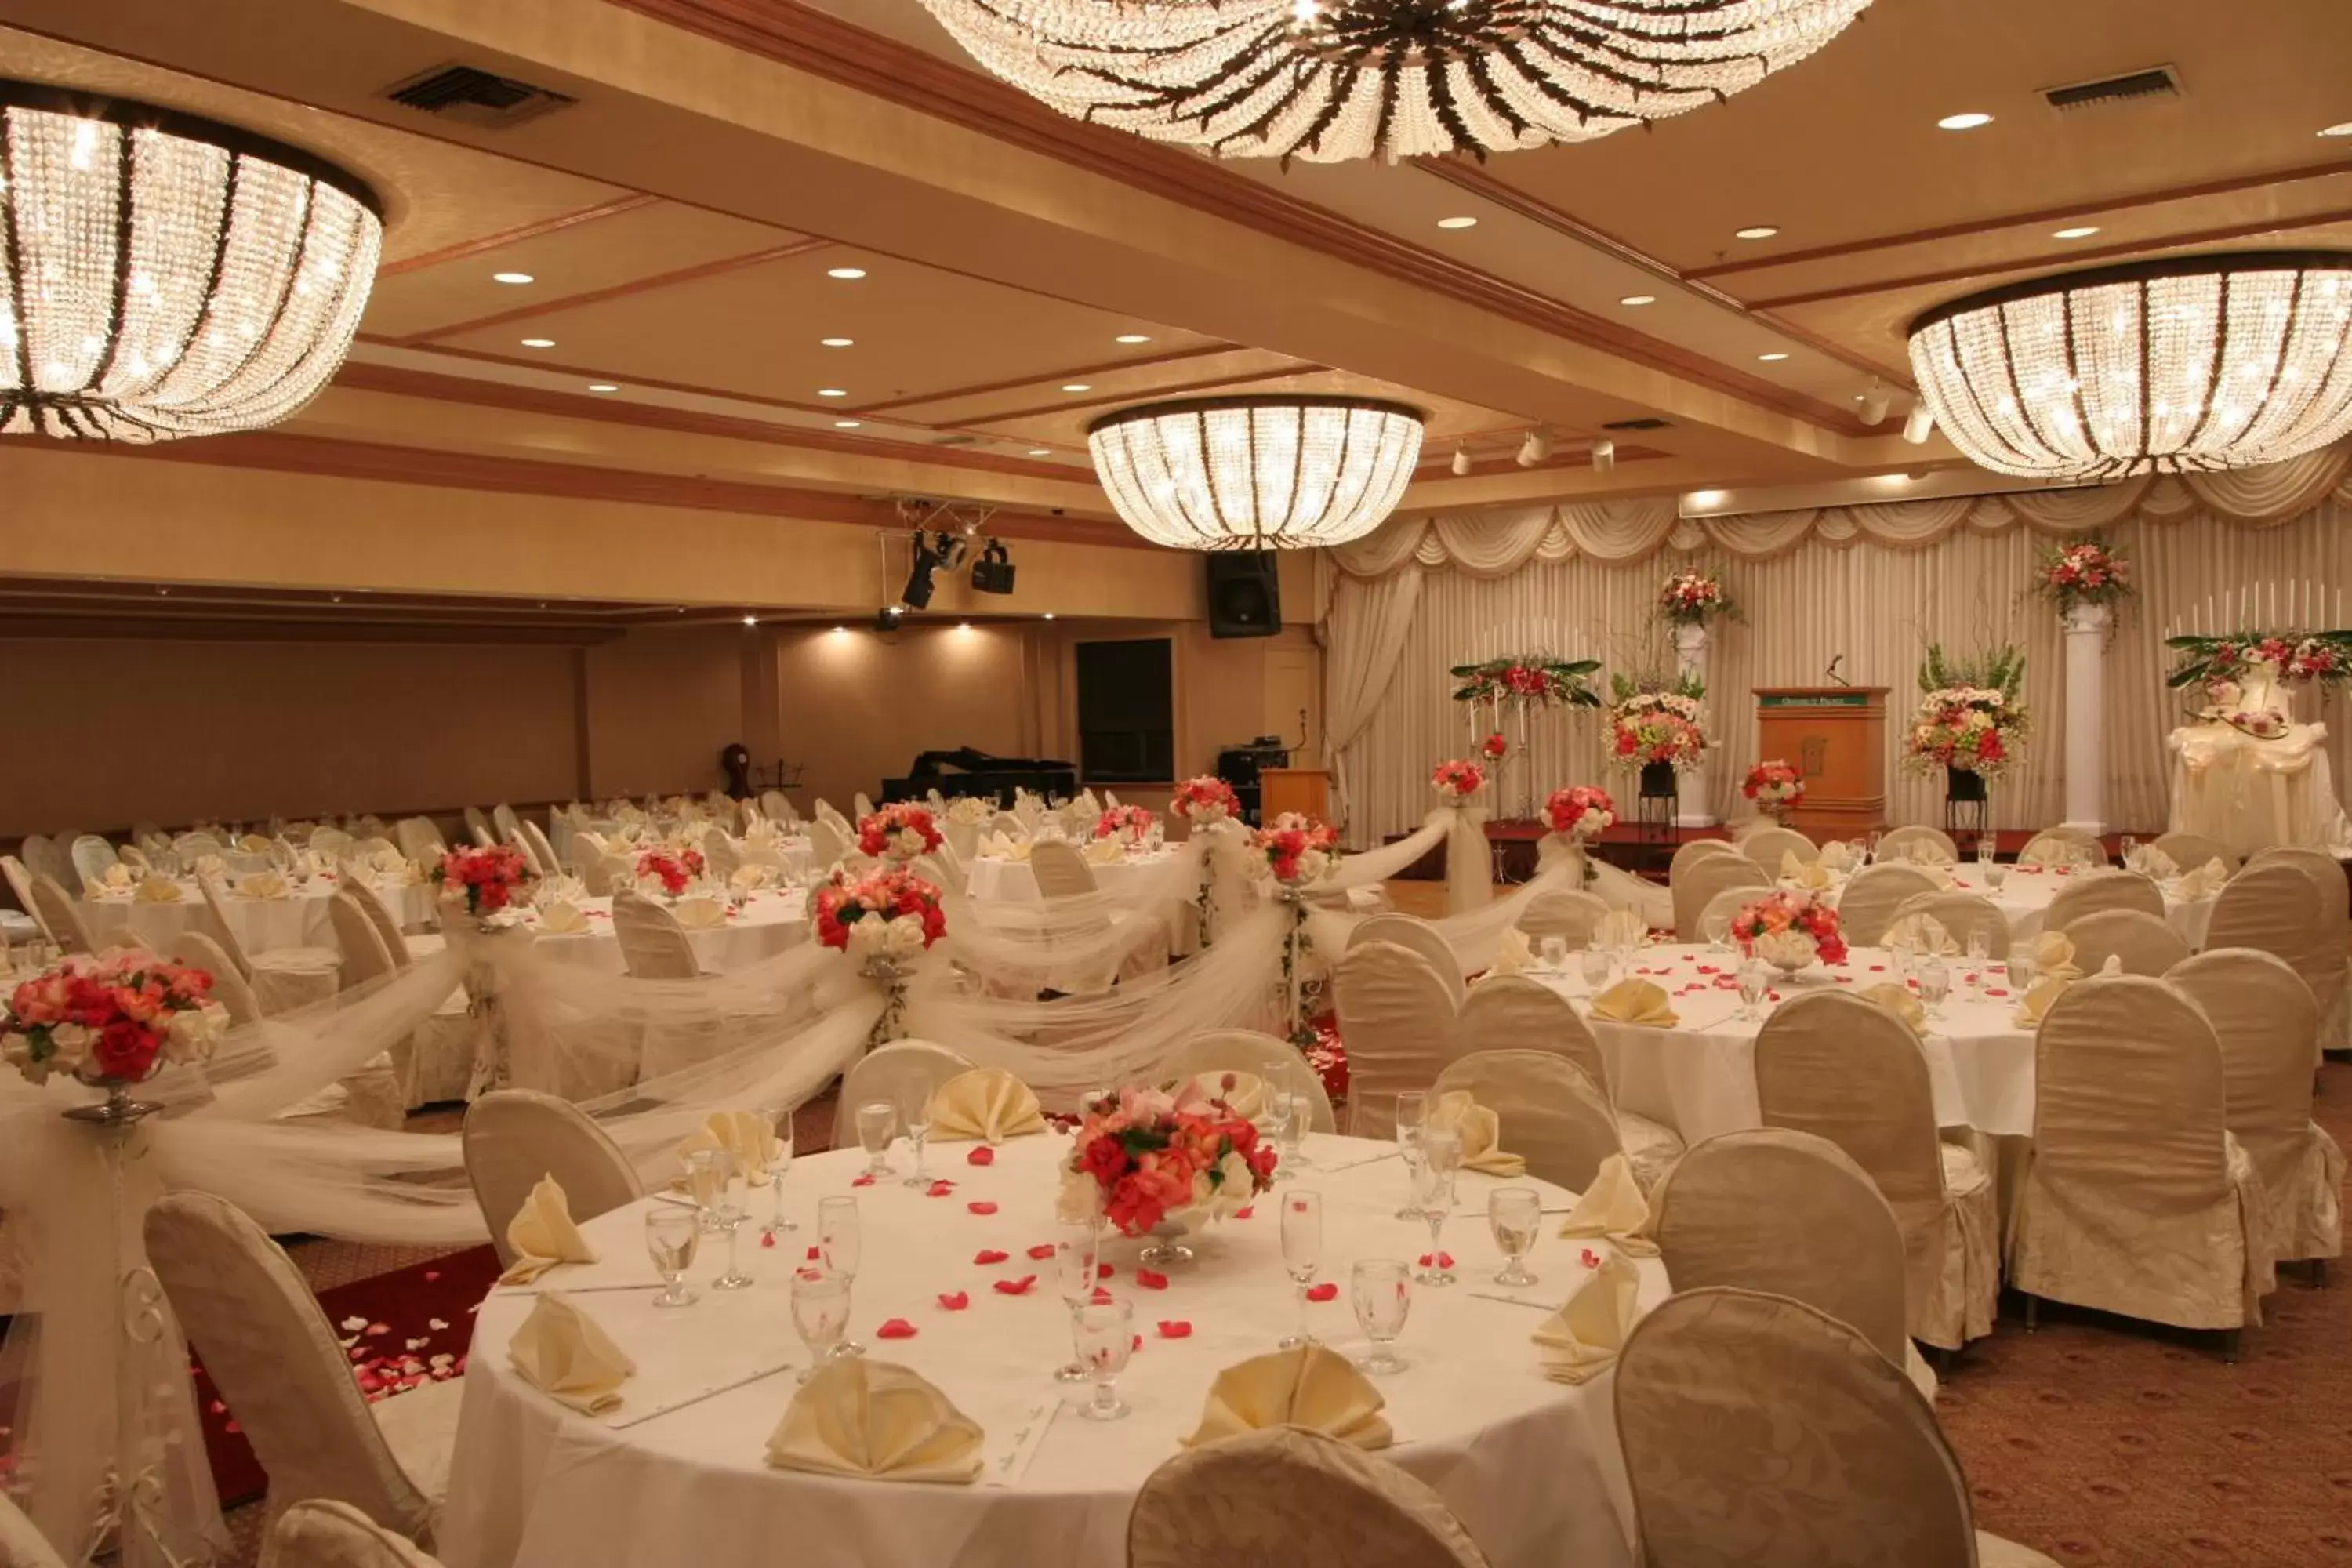 Banquet/Function facilities, Banquet Facilities in Oxford Palace Hotel